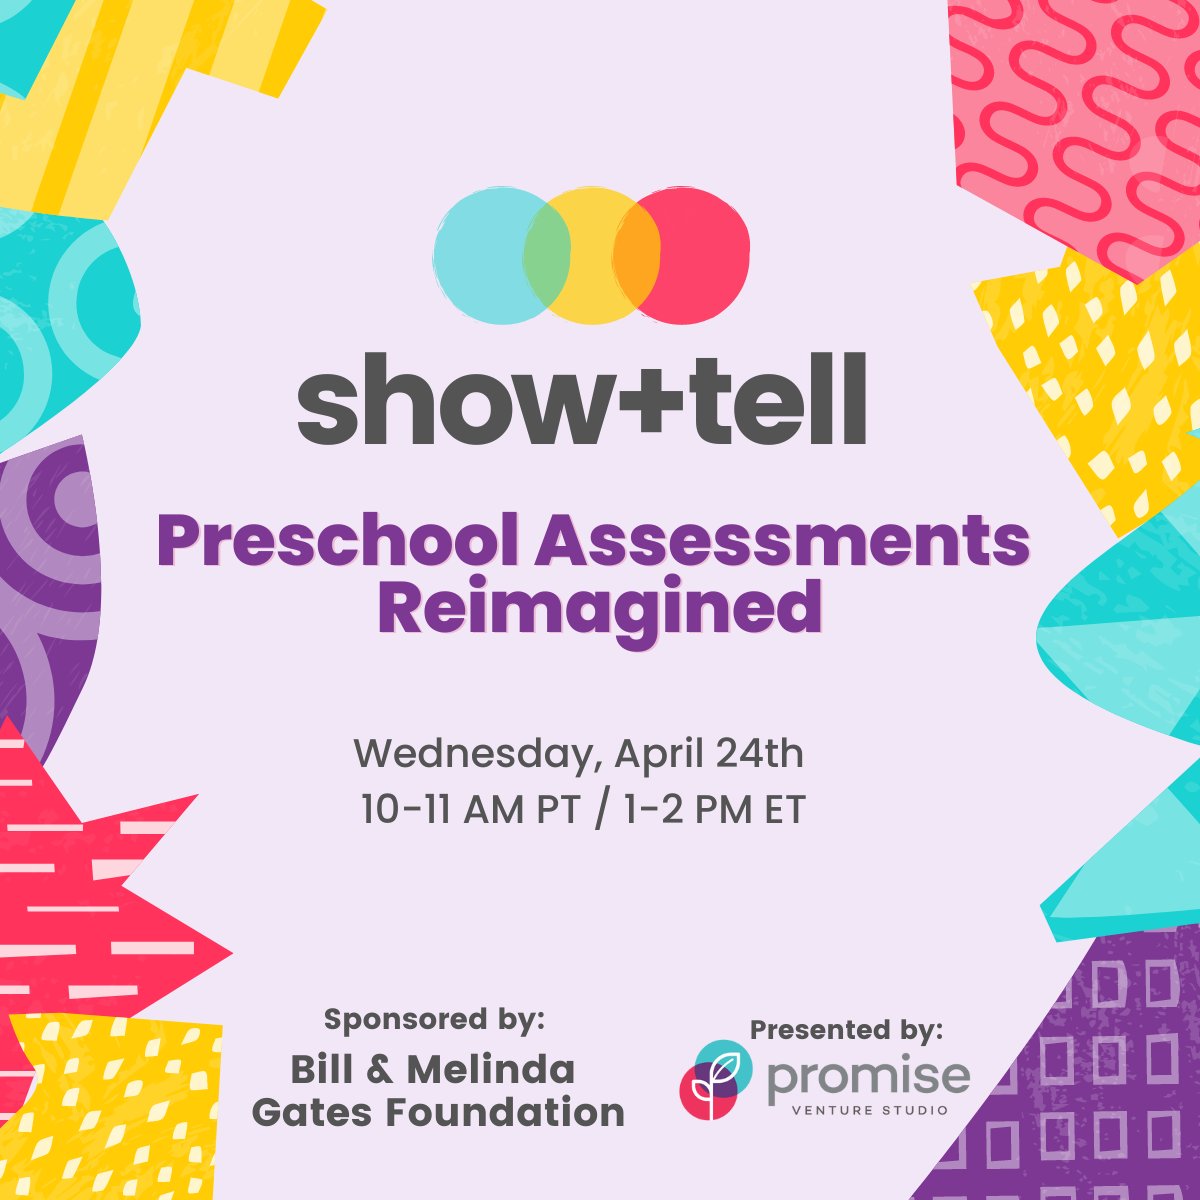 Join #ToolsCompetition partner @innatepromise to learn about the latest innovations in #EarlyLearning assessments at their Show+Tell event on April 24. Register and learn more! bit.ly/st-preK